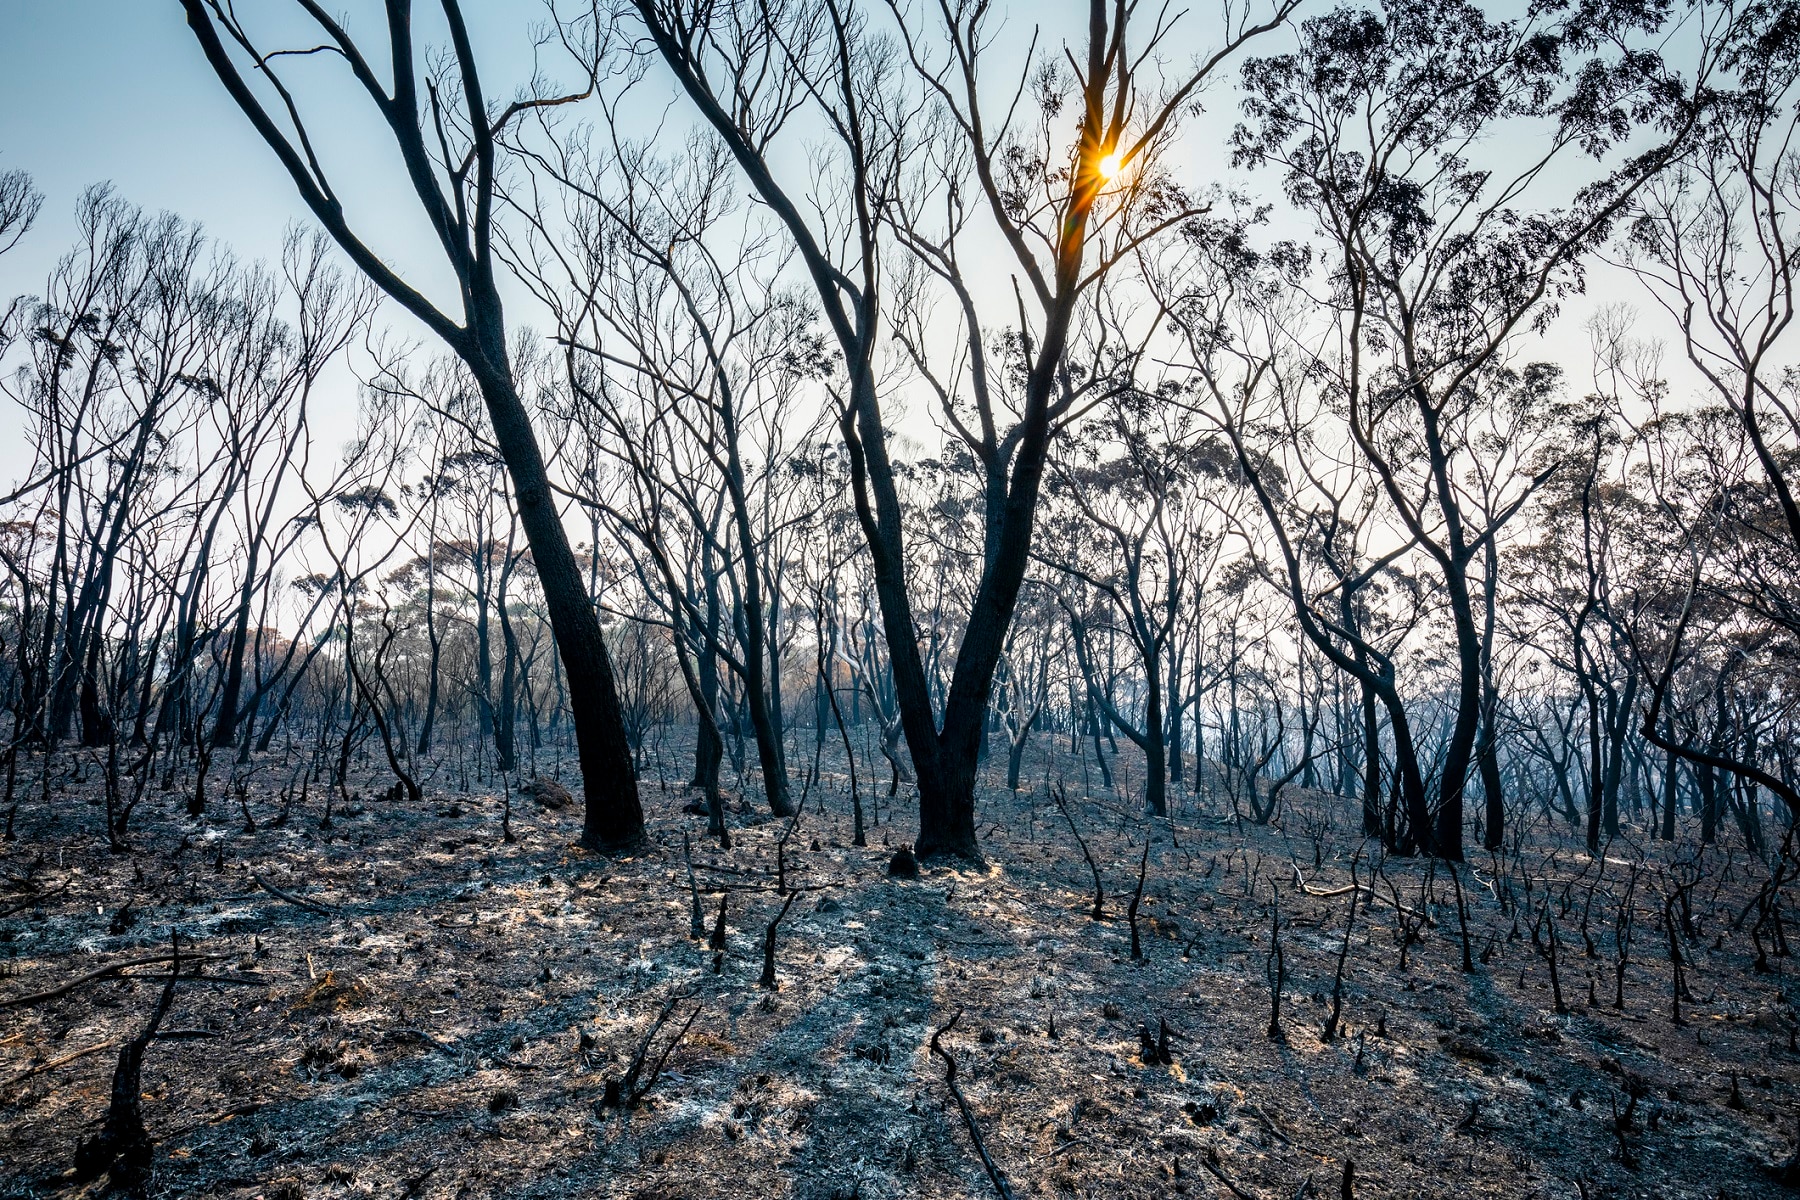 Burnt landscape with charred trees, ash and setting sun, forest fire, bushfire in Australia